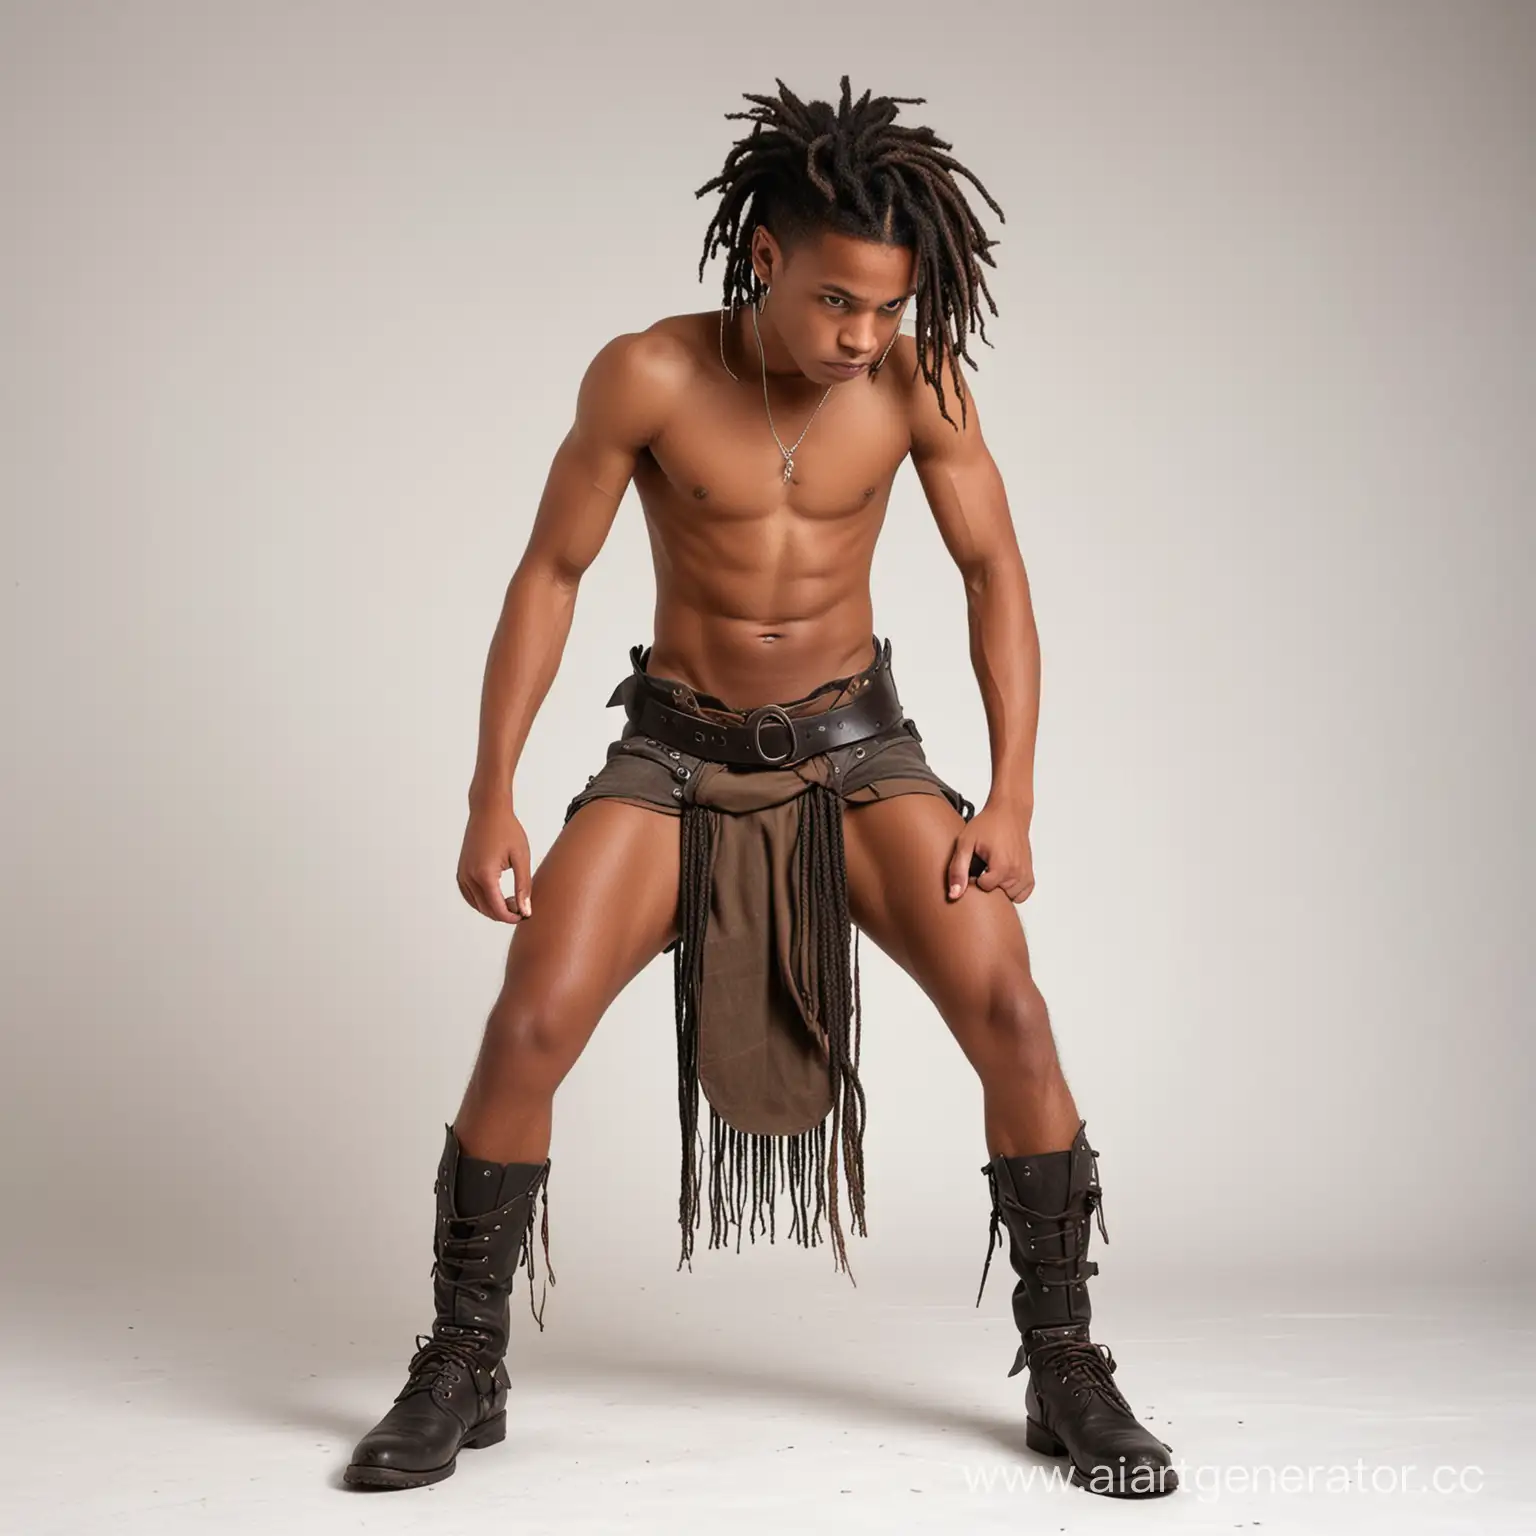 Young-Black-Warrior-Teen-with-Dreadlocks-in-Leather-Attire